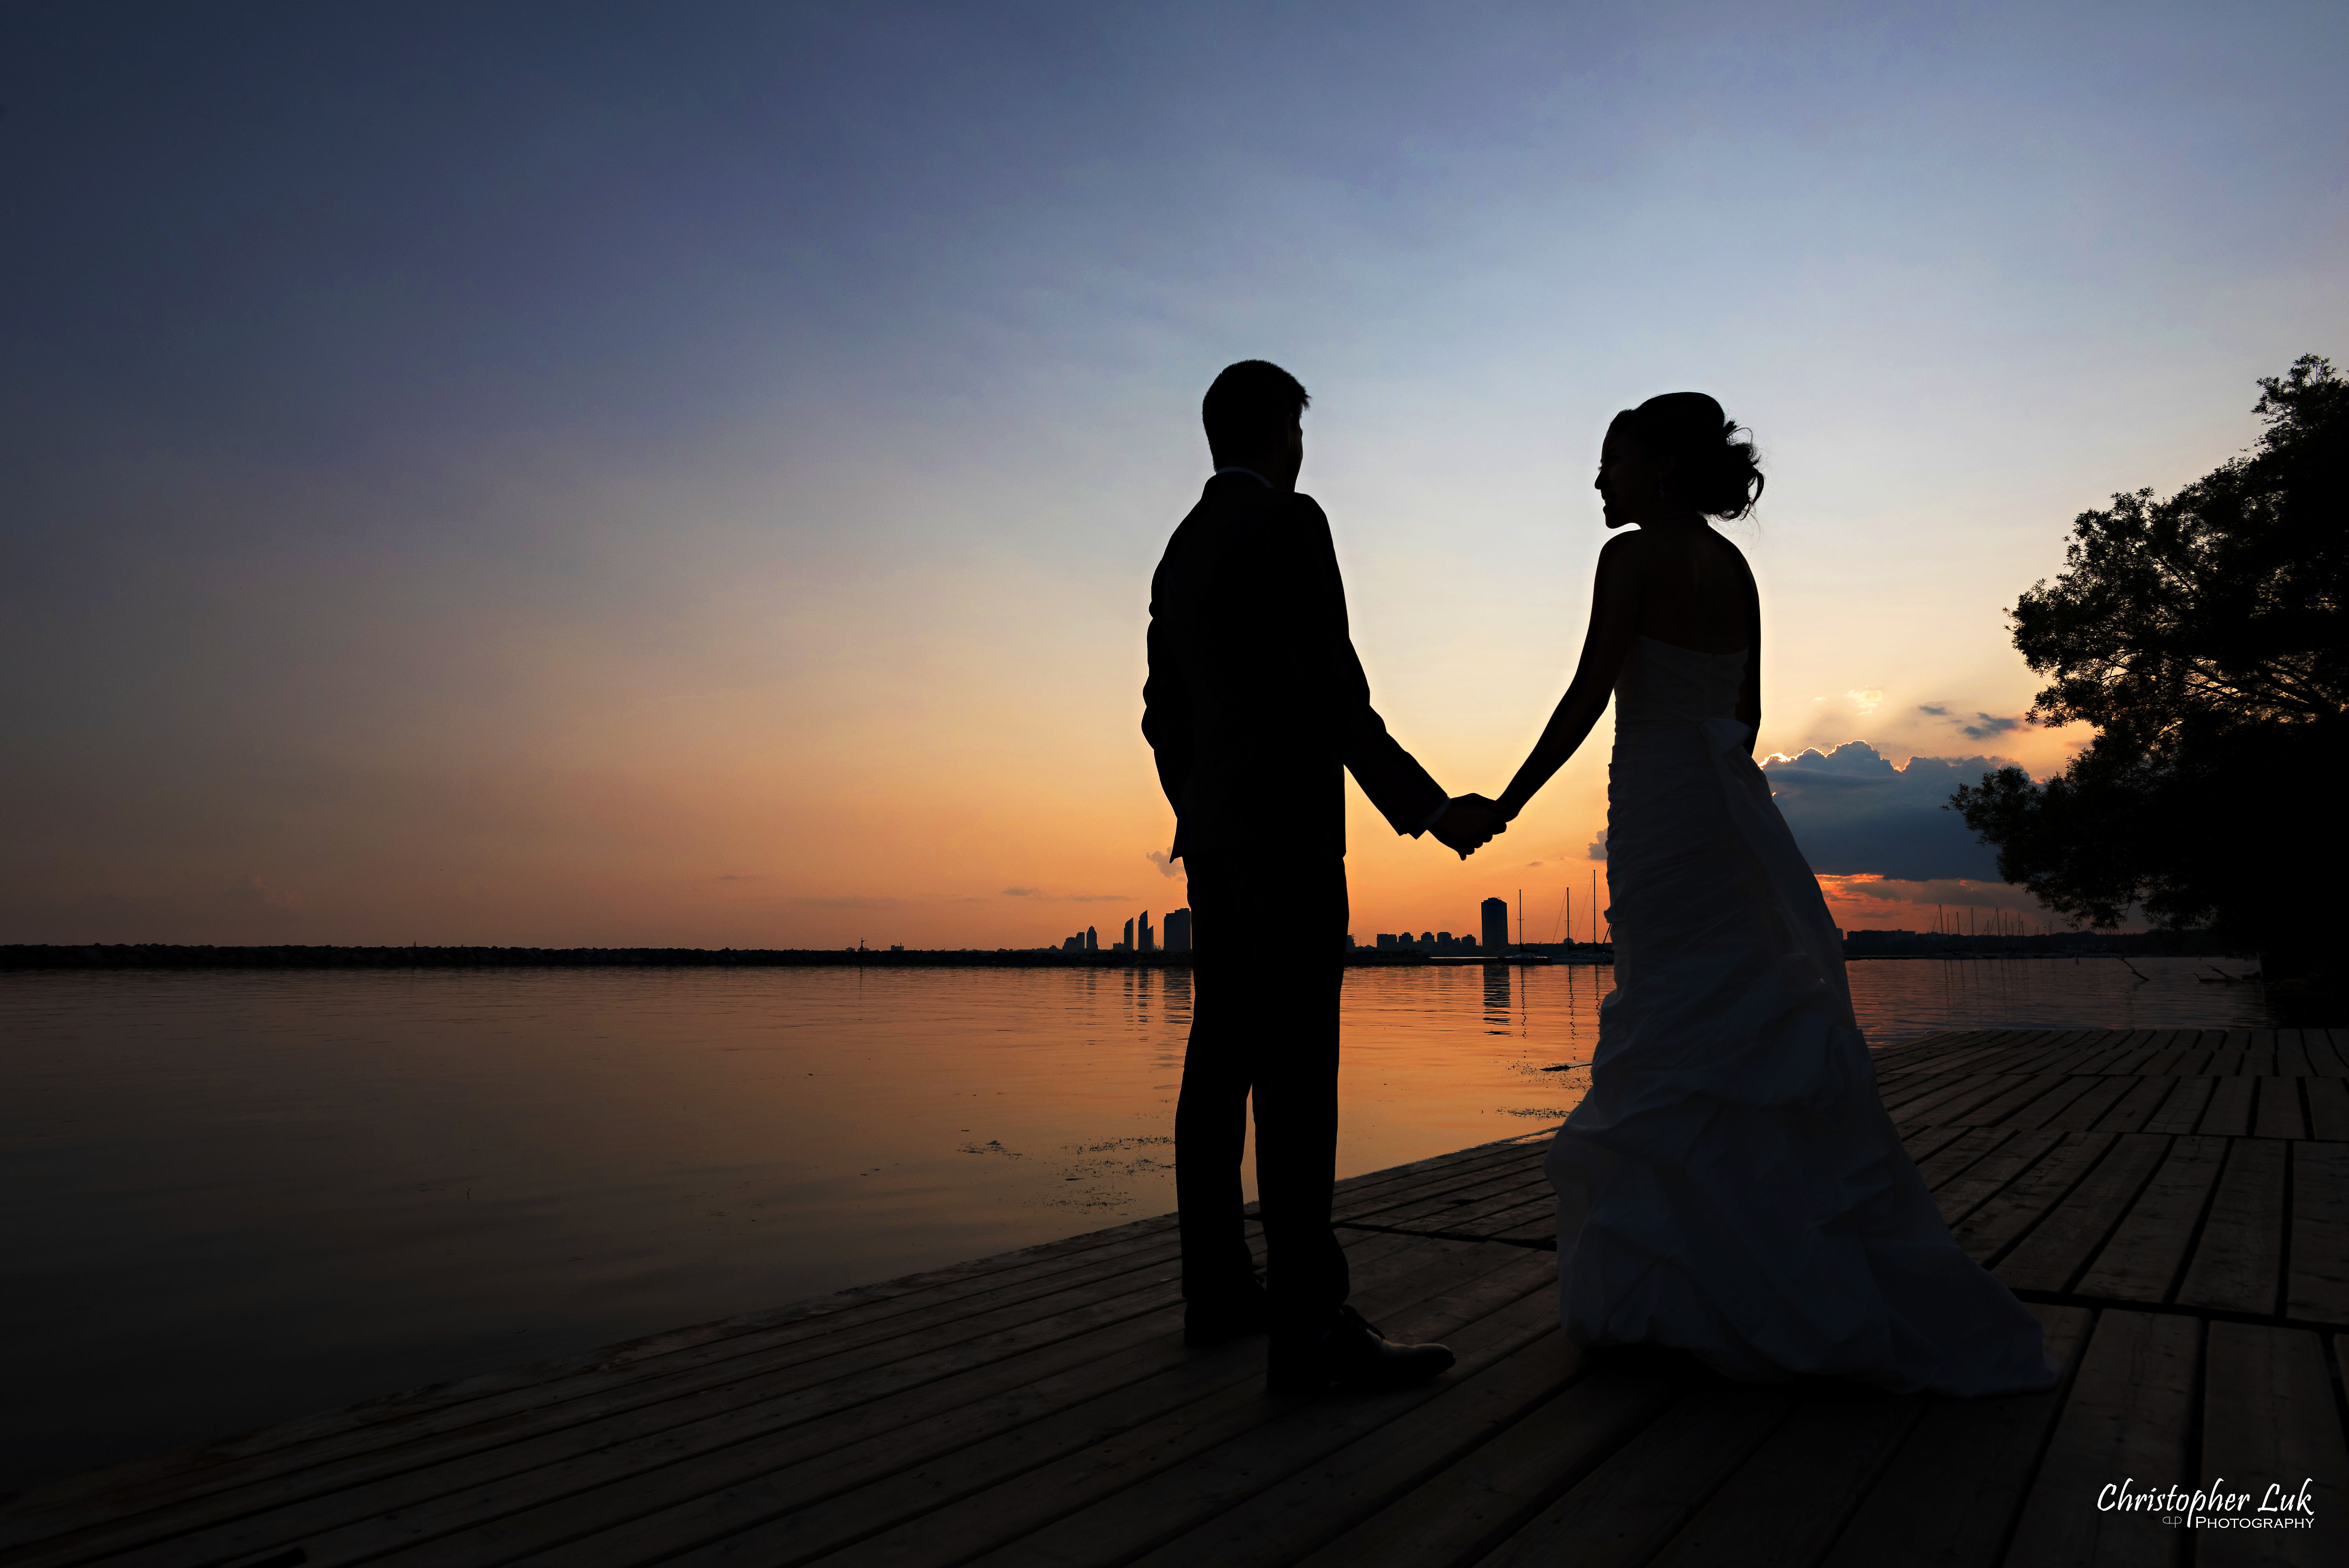 Christopher Luk 2015 - Jaynelle and Ernest's Wedding - Toronto Chinese Baptist Church Osgoode Hall Argonaut Rowing Club Henley Room Waterfront Venue - Bride Groom Creative Relaxed Portrait Session Photojournalistic Natural Candid Posed Lakefront Scenic Warm Intense Sunset Colours Silhouette